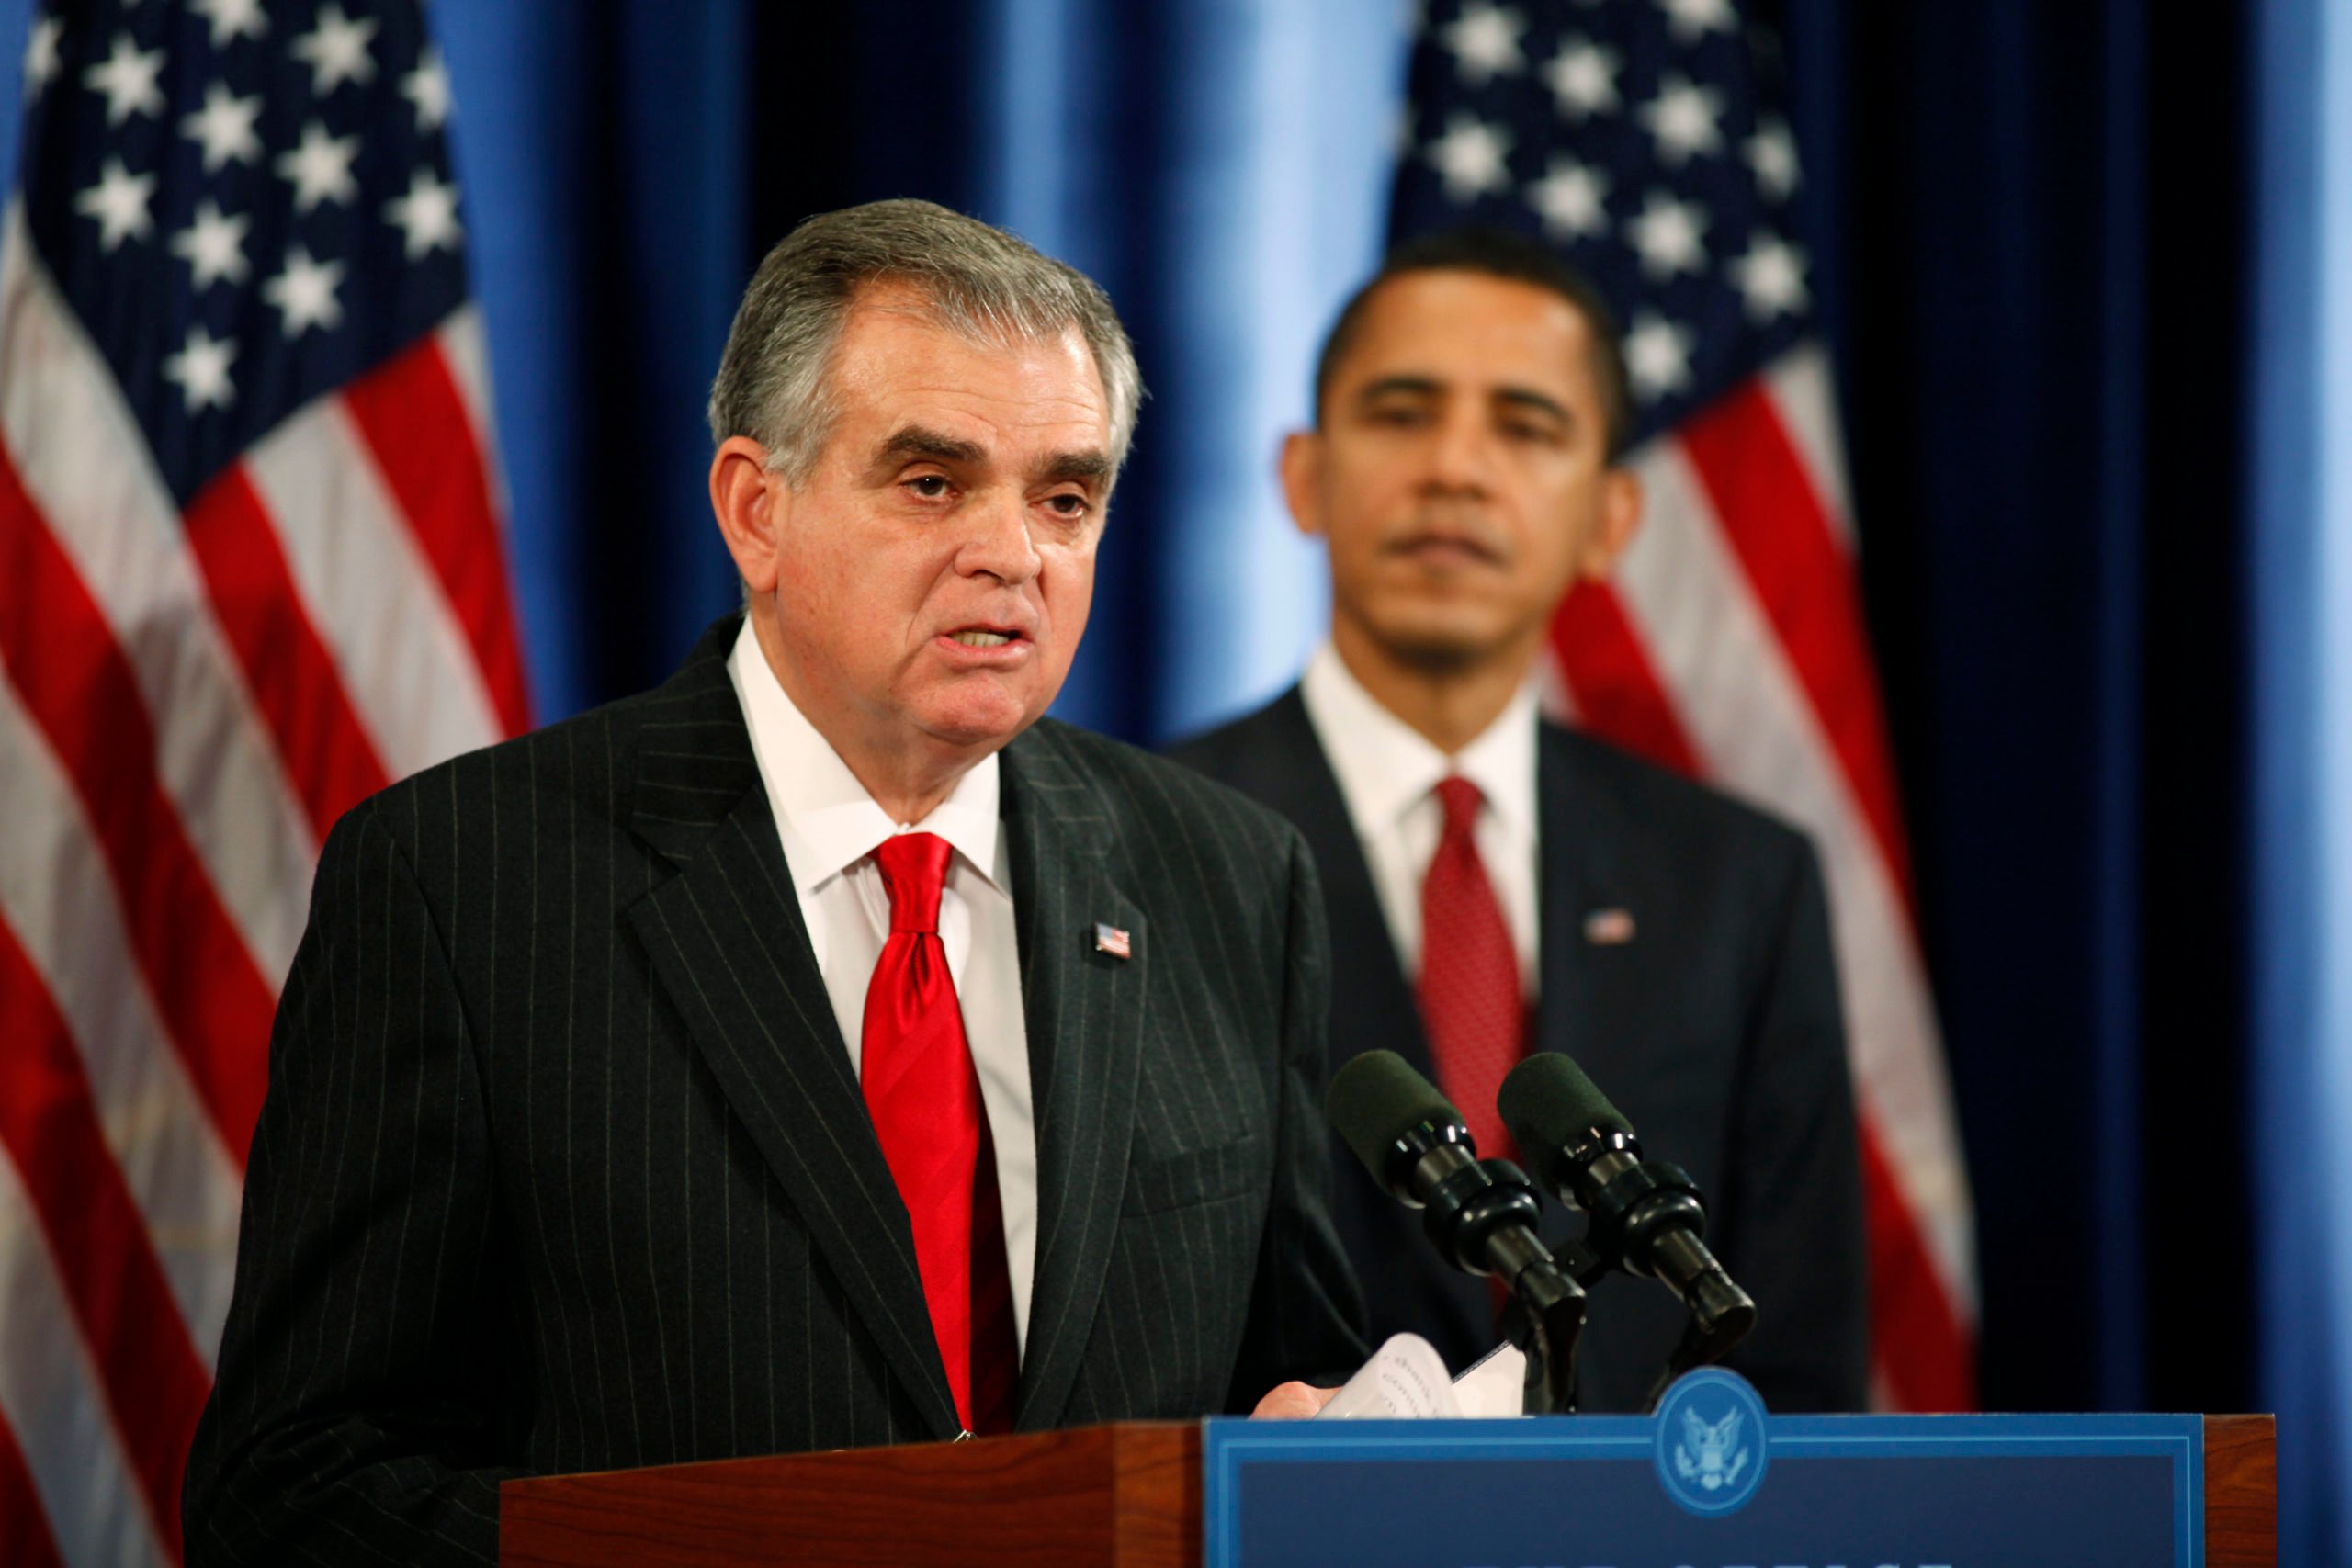 CHICAGO - DECEMBER 19: U.S. Rep. Ray LaHood (R-IL), nominated for transportation secretary speaks with the media as President-elect Barack Obama looks on during a press conference at the Drake Hotel December 19, 2008 in Chicago, Illinois. Obama also made a statement about the U.S. President George W. Bush's auto industry loan package. (Photo by Ann Ryan-Pool/Getty Images)